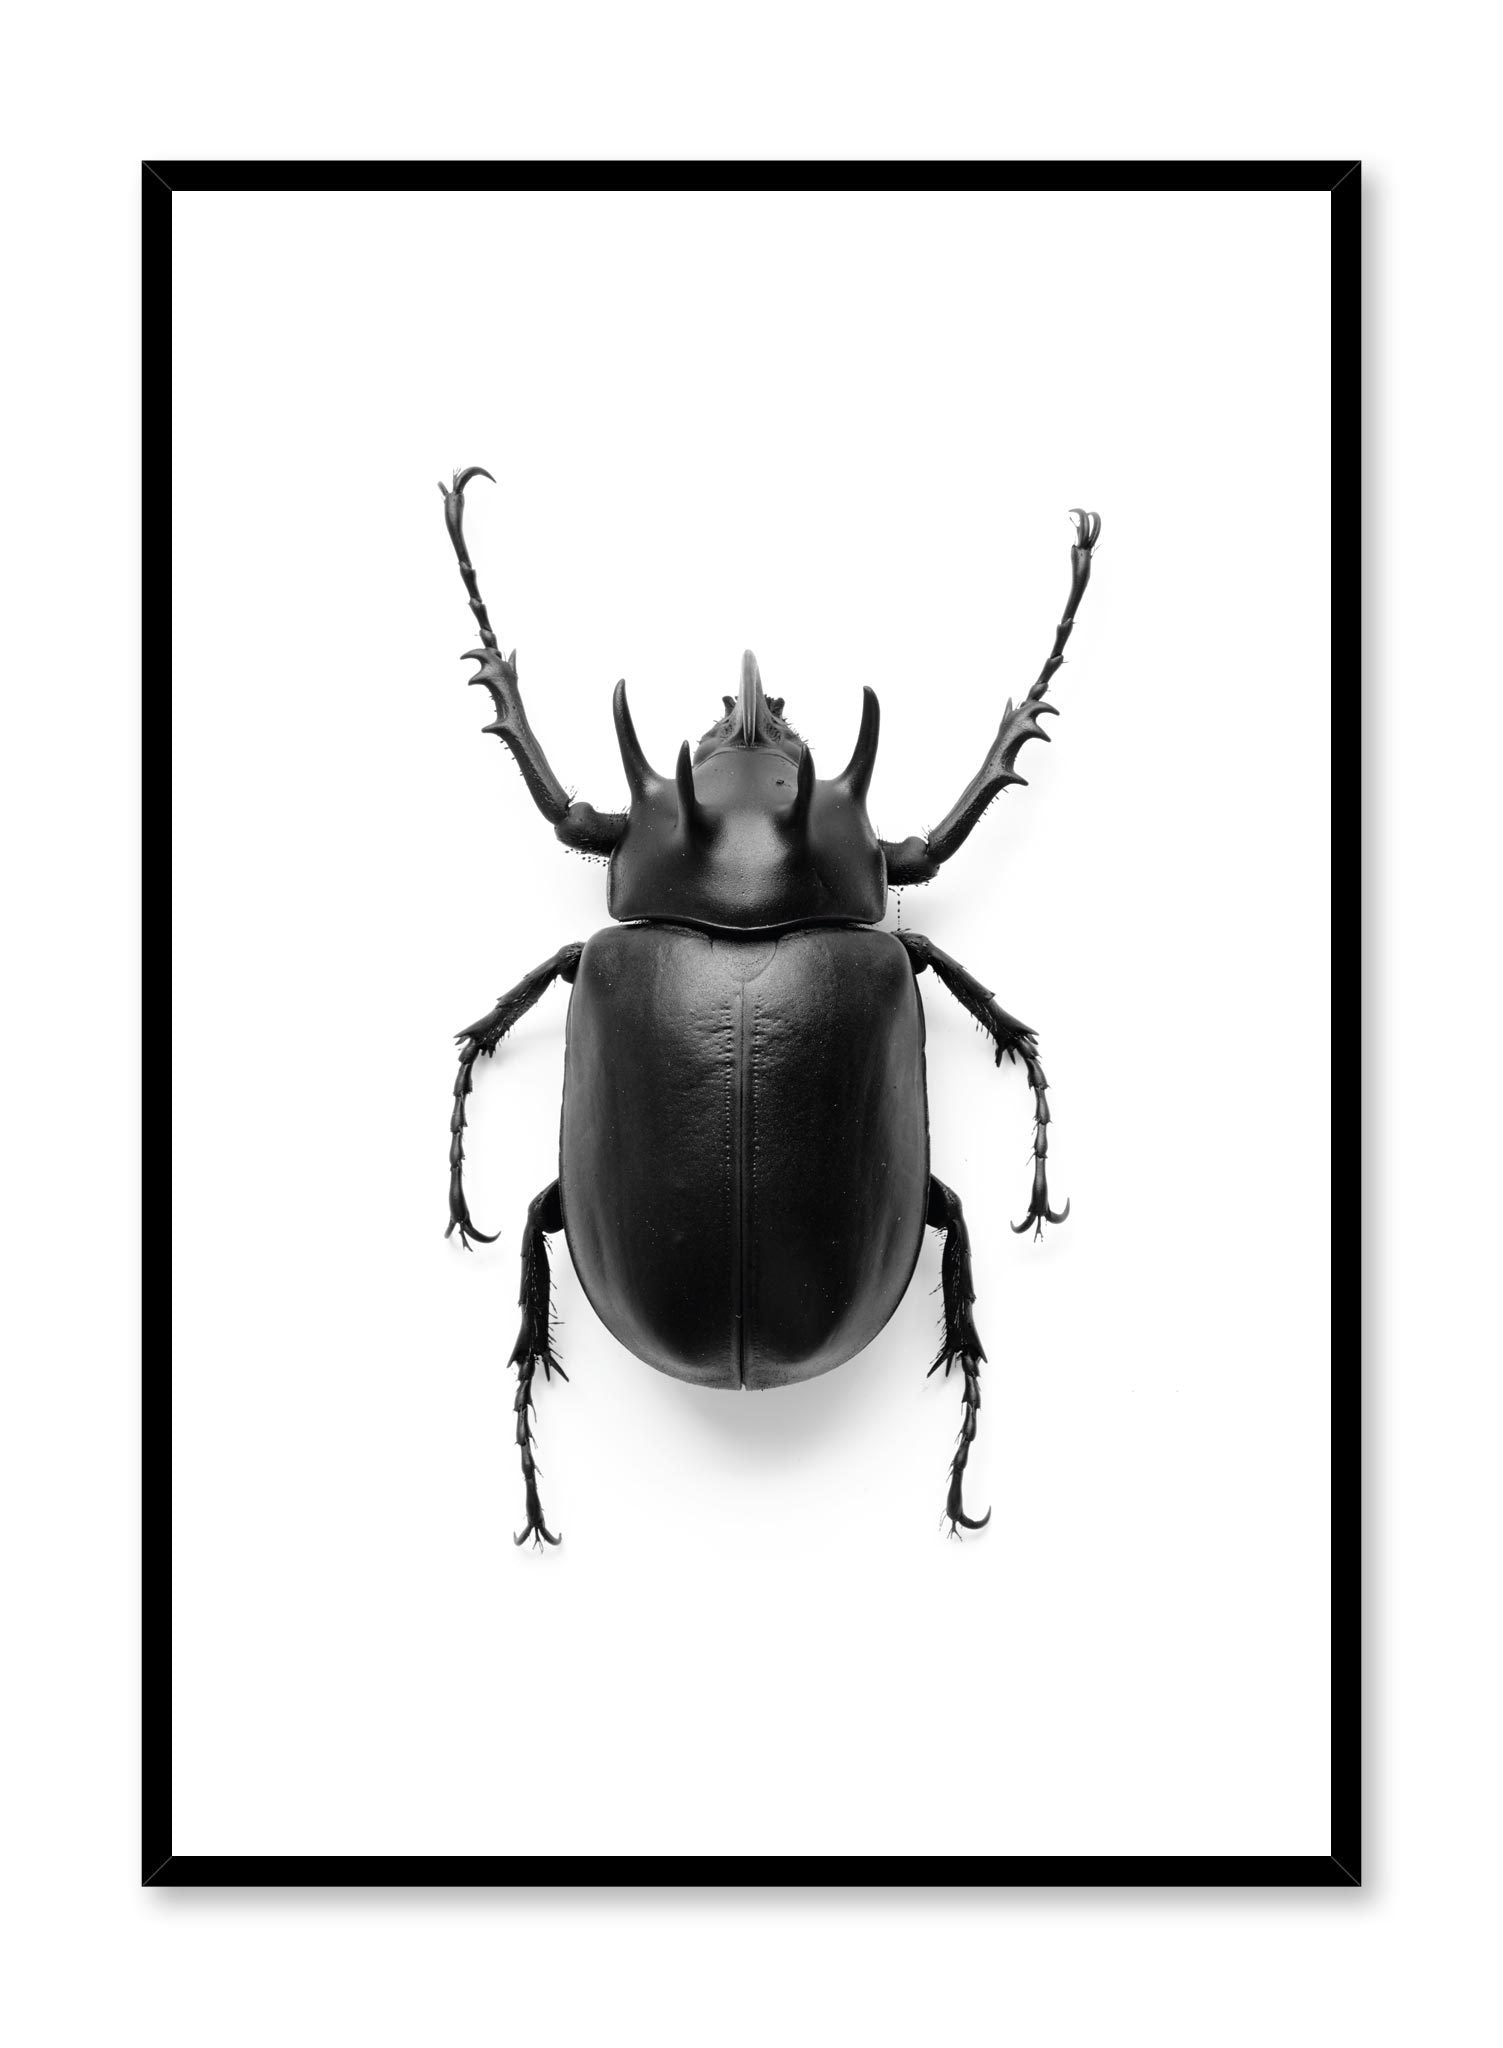 Minimalist design poster by Opposite Wall with black and white animal photography of Black Beetle Coleoptera